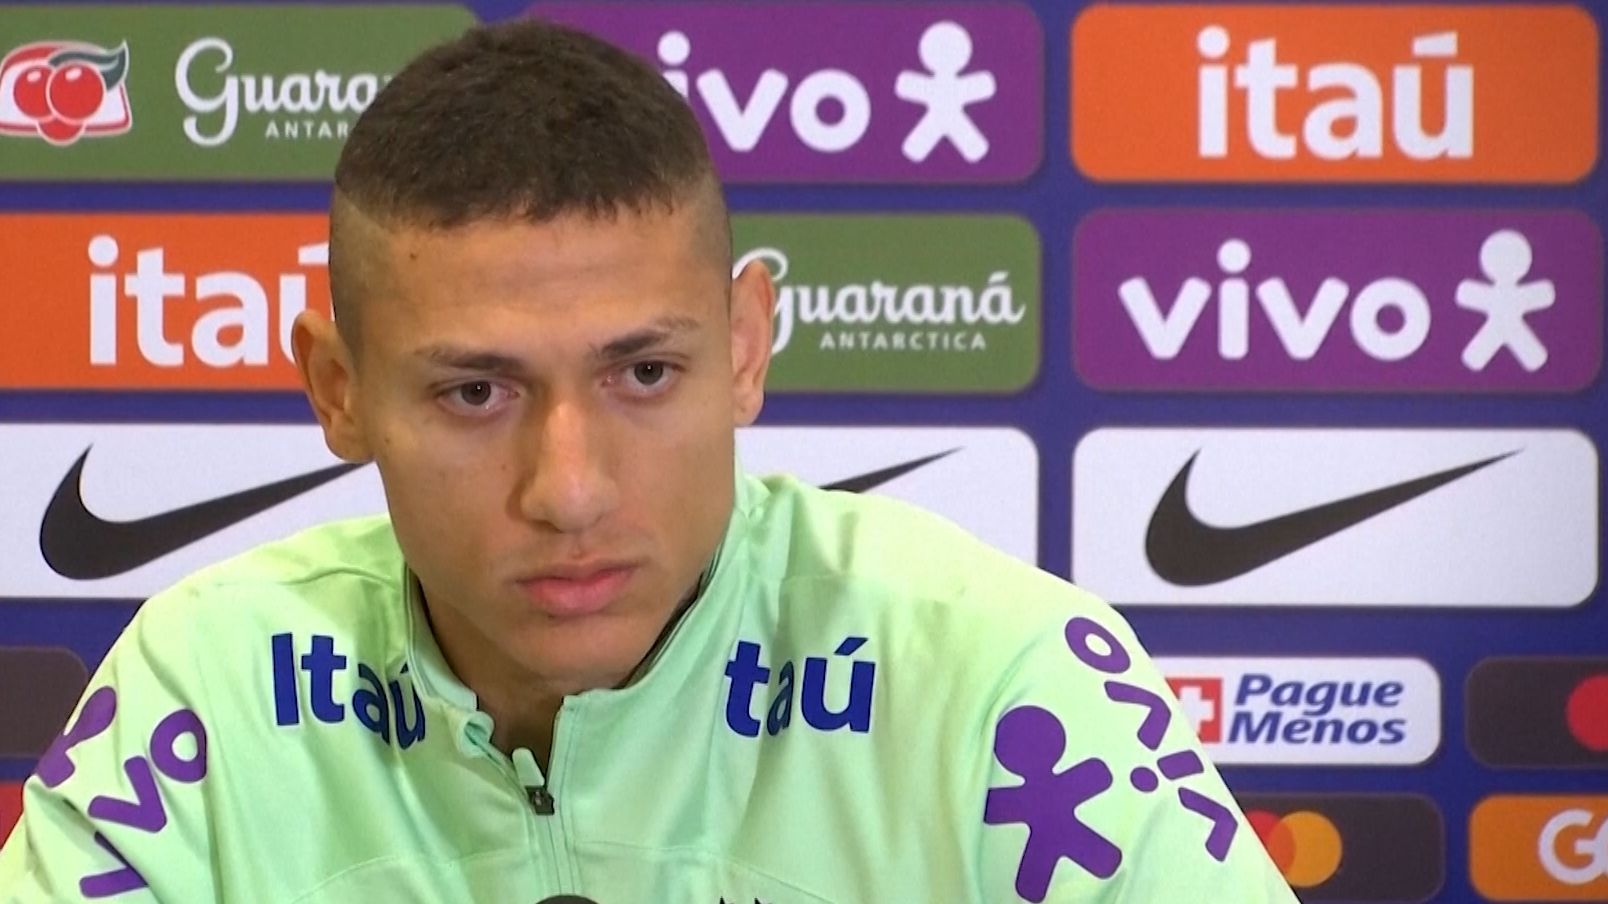 Richarlison Expresses His Depression Battle After the World Cup: ‘I wanted to give up’